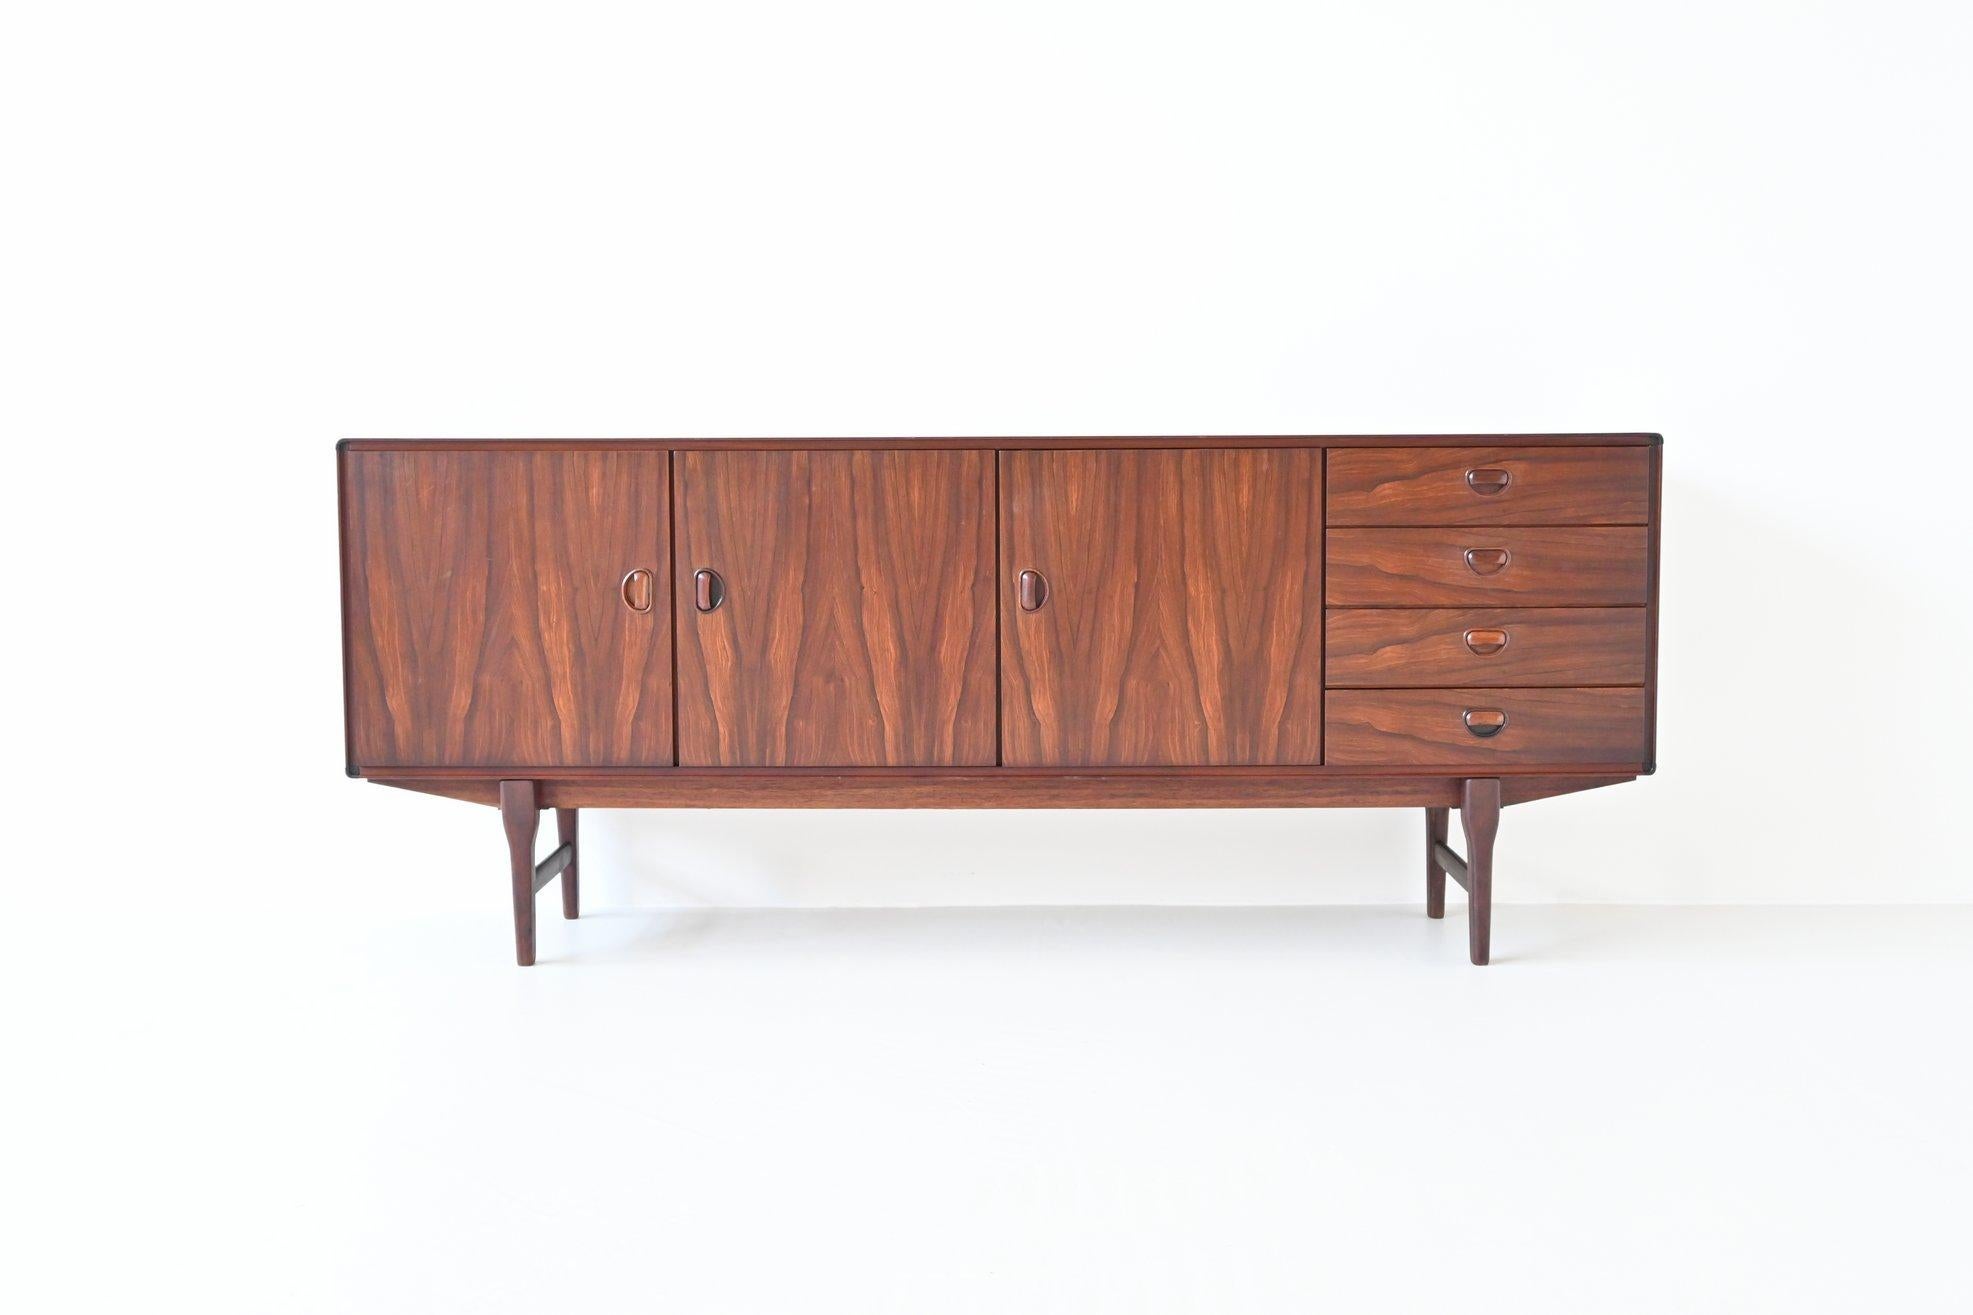 Very nice refined quality sideboard designed by Arnold Merckx Junior and manufactured by Fristho Franeker, The Netherlands 1969. This sideboard is made of rosewood veneer and has a very nice and warm grain. On the left there are three doors with two